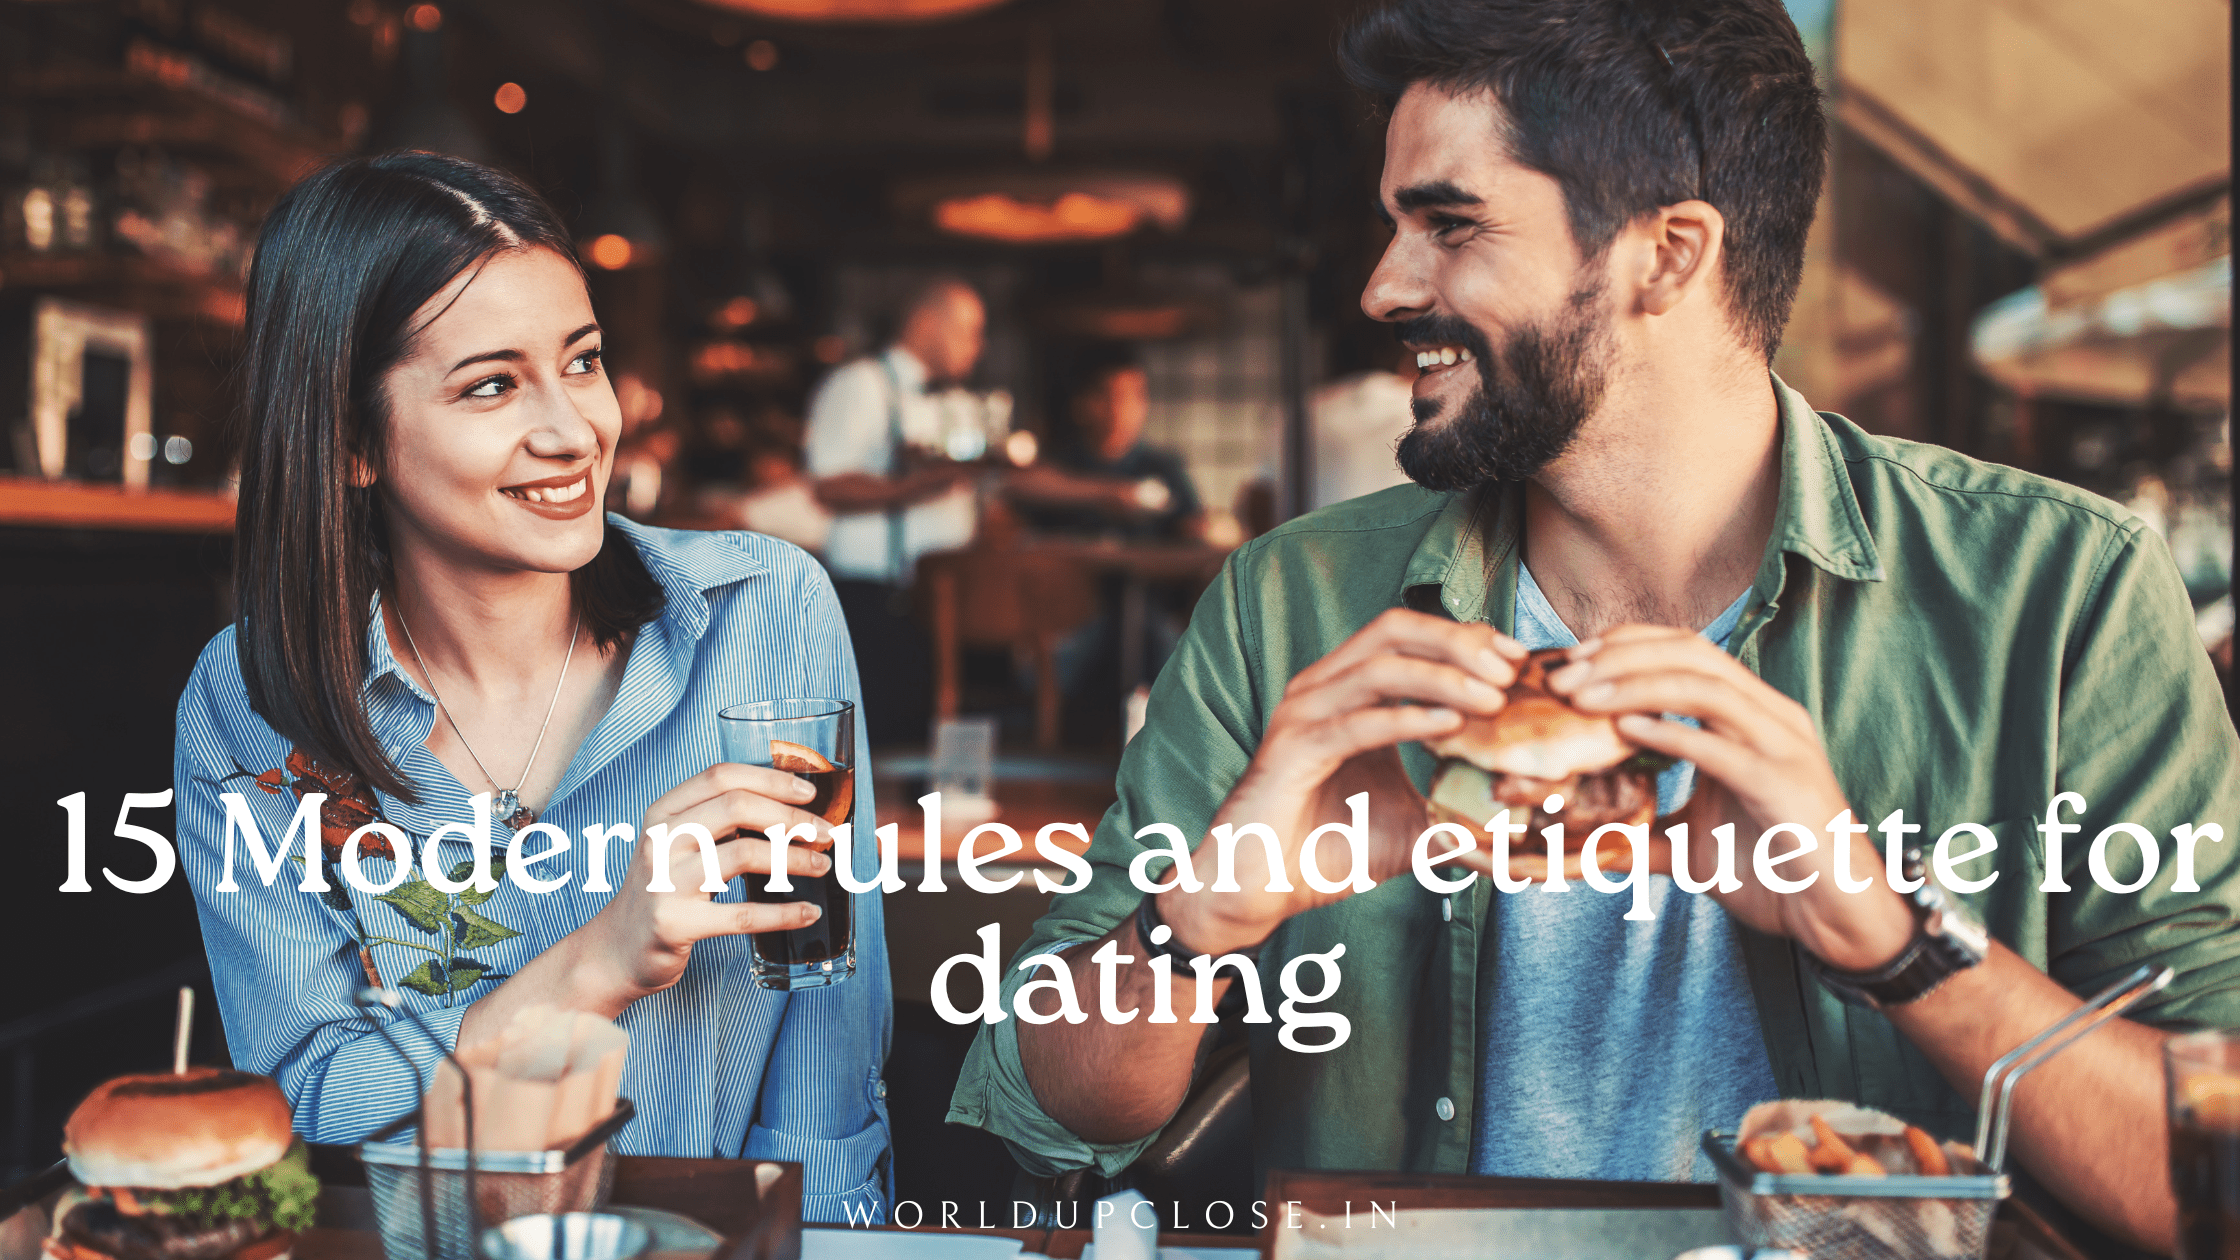 15 Modern rules and etiquette for dating 1